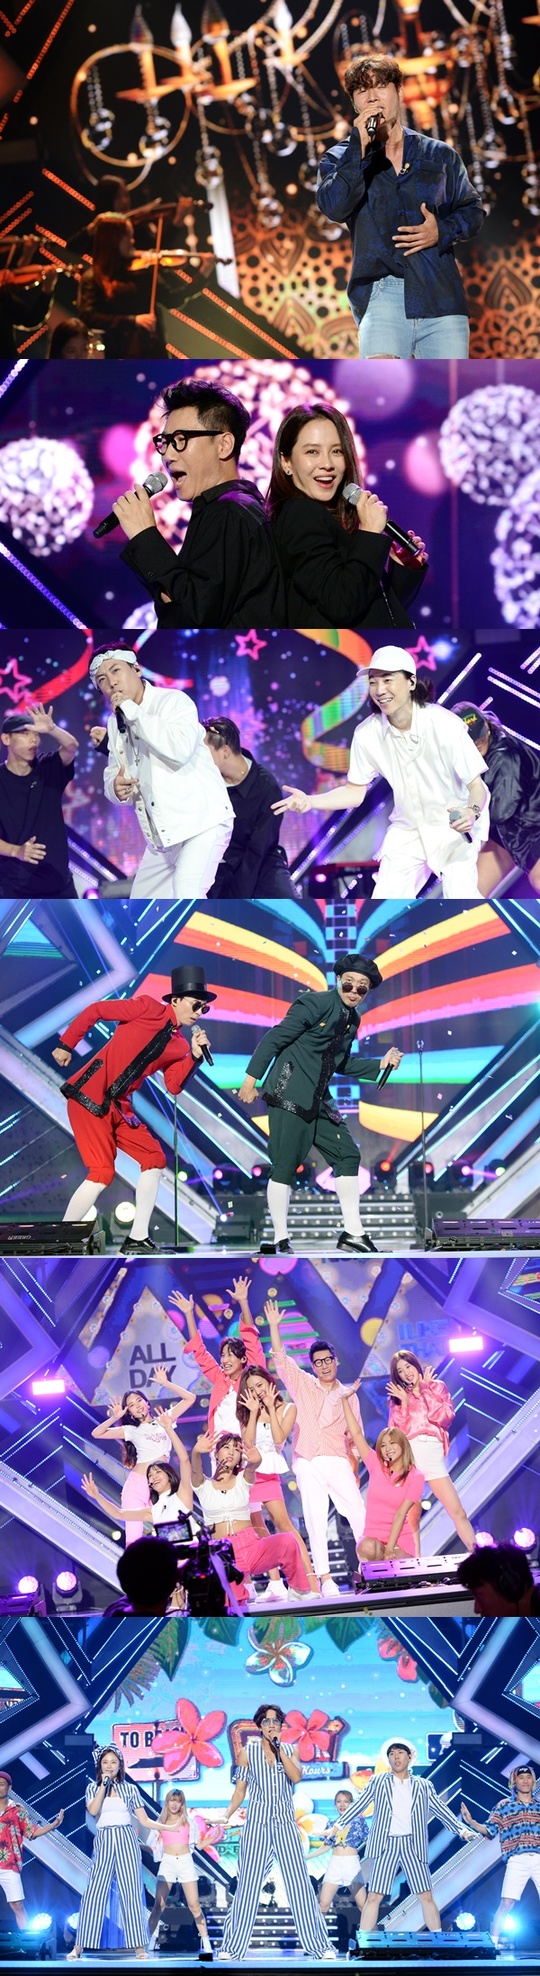 The second story of T-Shirt, individual stage for each member, will be unveiled.On SBS Running Man, which will be broadcast on September 15, the second story of the 9th anniversary fan meeting T-Shirt will be held, and the collaboration stage with the top artists in Korea and the individual stage of the members will be revealed.First, the members show individual stages for their fans only.Ji Suk-jin & Song Ji-hyo, who usually showed the Team-Tae-Gyeong-Gyeong-Gyeong-Chemmy, will show an unexpected appearance by preparing a duet song that emits fatal charm on stage.In addition, Kim Jong-kook shows off his creepy singing skills by singing the movie Aladdin OST Speechless, a topic song, in the aspect of 24th Veteran singer rather than Kim Jong-kook for fans.In addition, Lee Kwang-soo & Jeon So-min & Yang Se-chan Running Man youngest trio, which has been proud of their strong friendship within the team, has formed a new group for fans and presents unexpected surprise performance and amazing fan service.While the sexy dance of the dumbs was foreseen at the group dance, the two actresses also showed off their tremendous beauty and robbed fans of their eyes.The couple song of Yoo Jae-Suk & Haha, who won the duet stage with penalties, seems to be a big topic by bringing explosive field reaction with dance and colorful performance reminiscent of Michael Jackson.pear hyo-ju